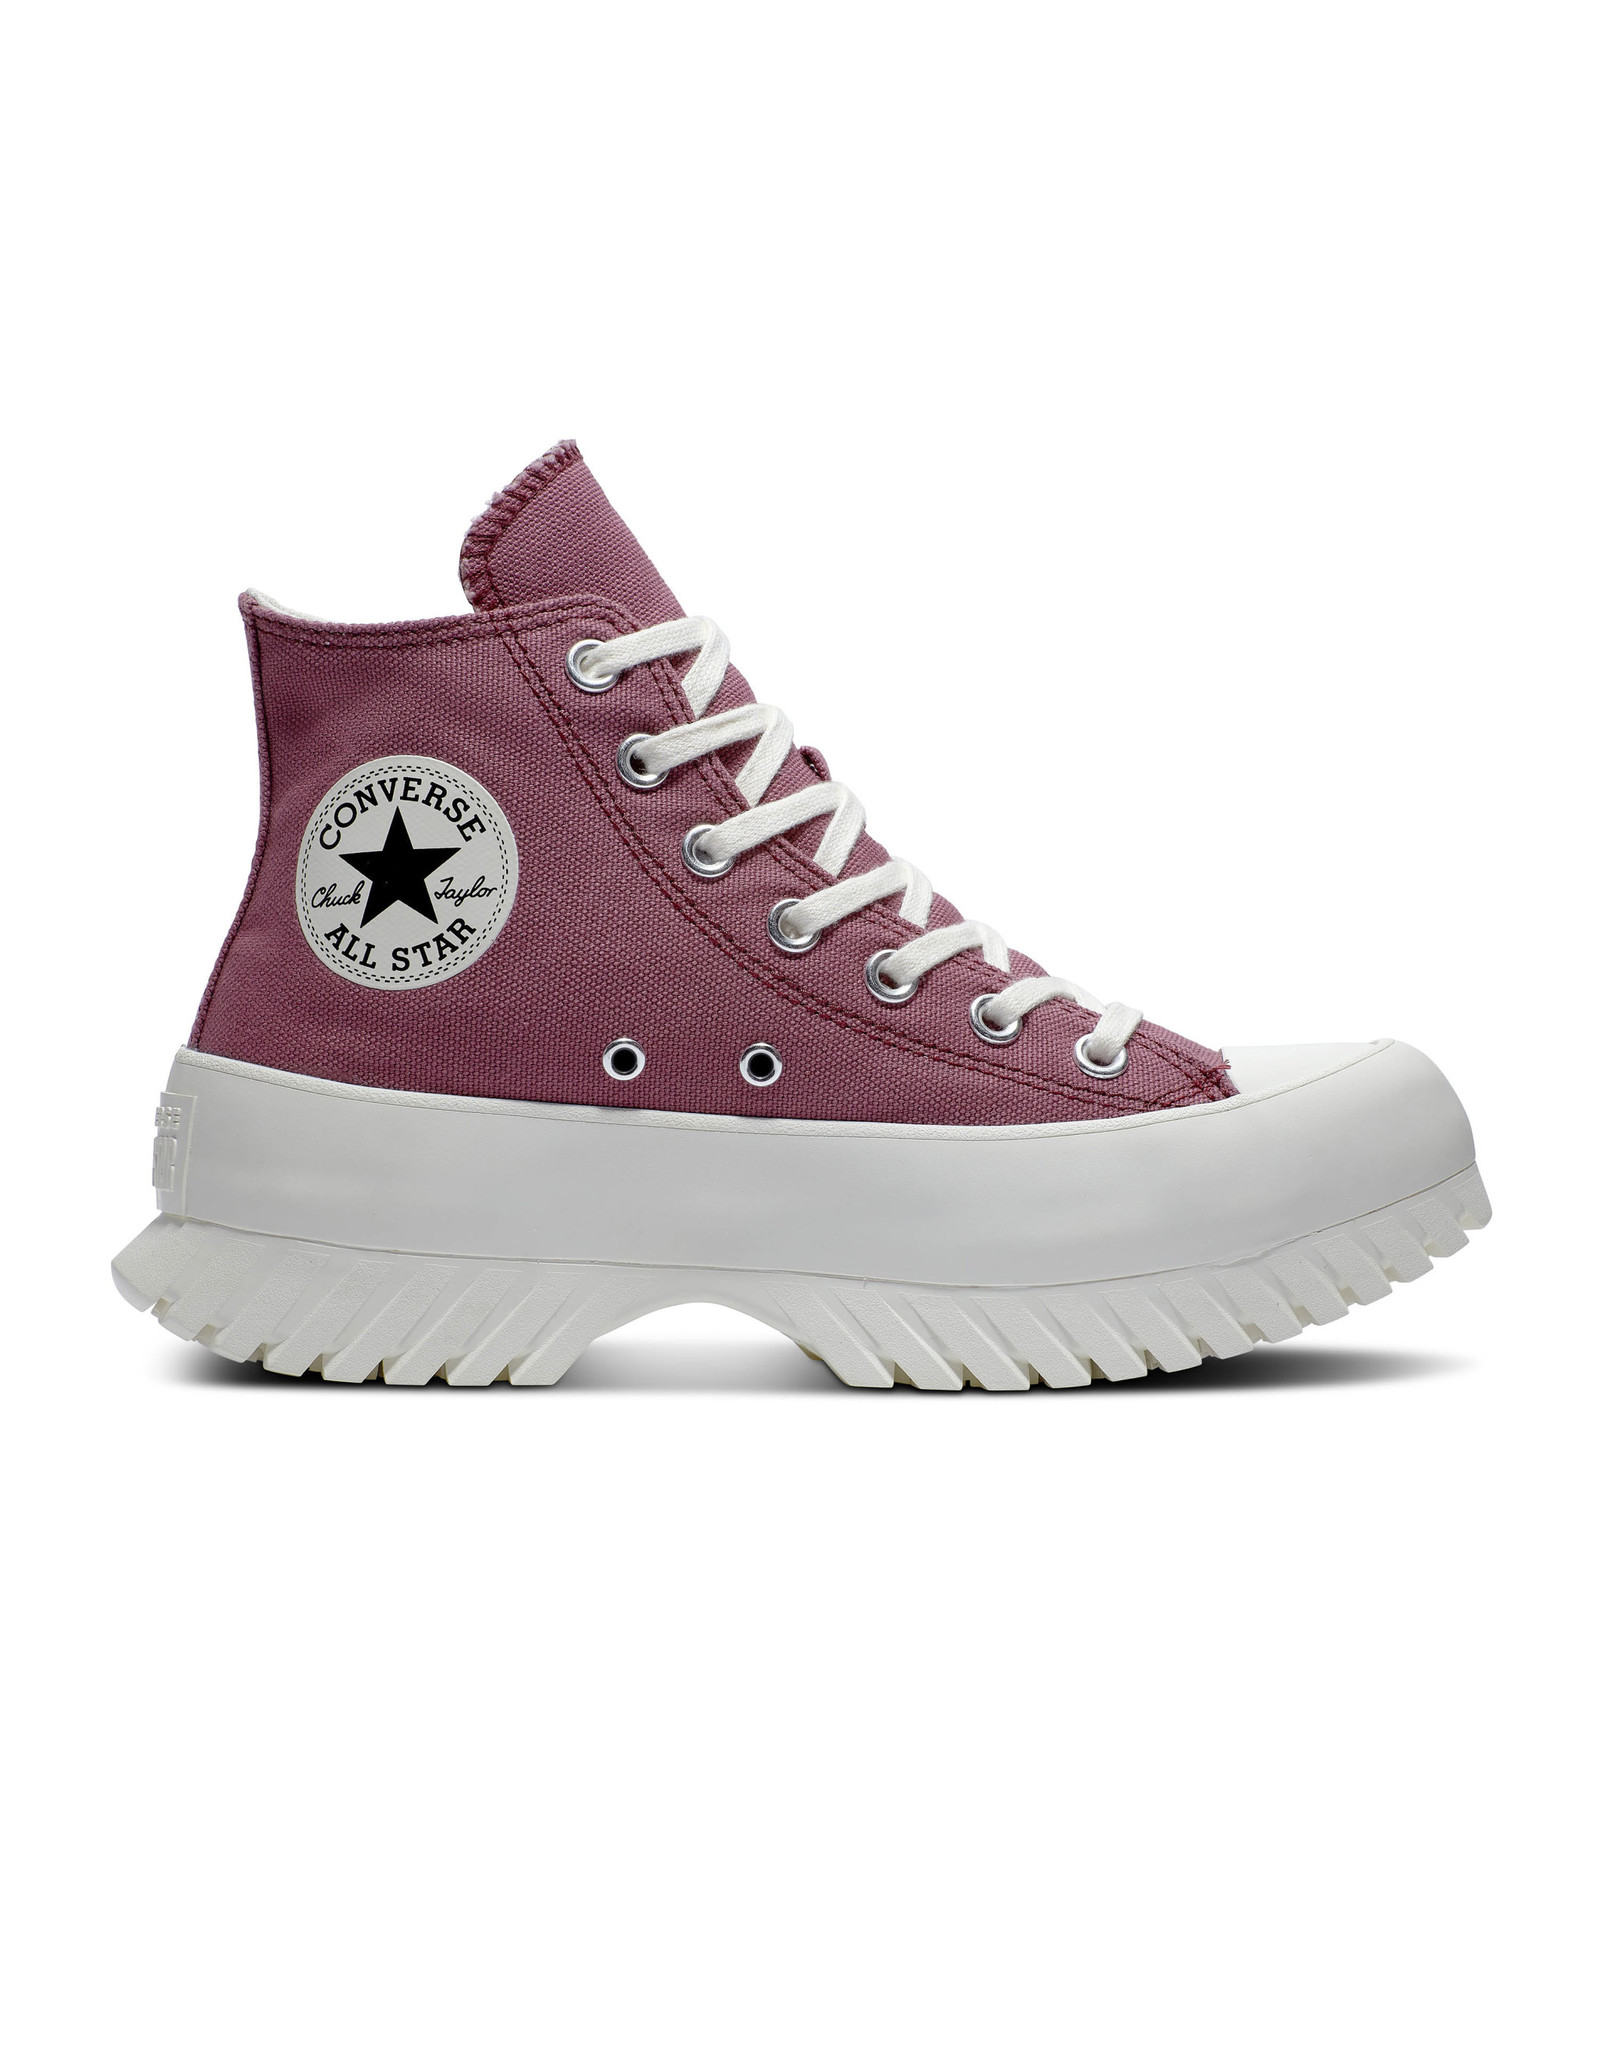 Chuck Taylor All Star LUGGED 2.0 SEASONAL COLOR MYSTIC ORCHID/BLACK/EGRET C294MY - A03701C